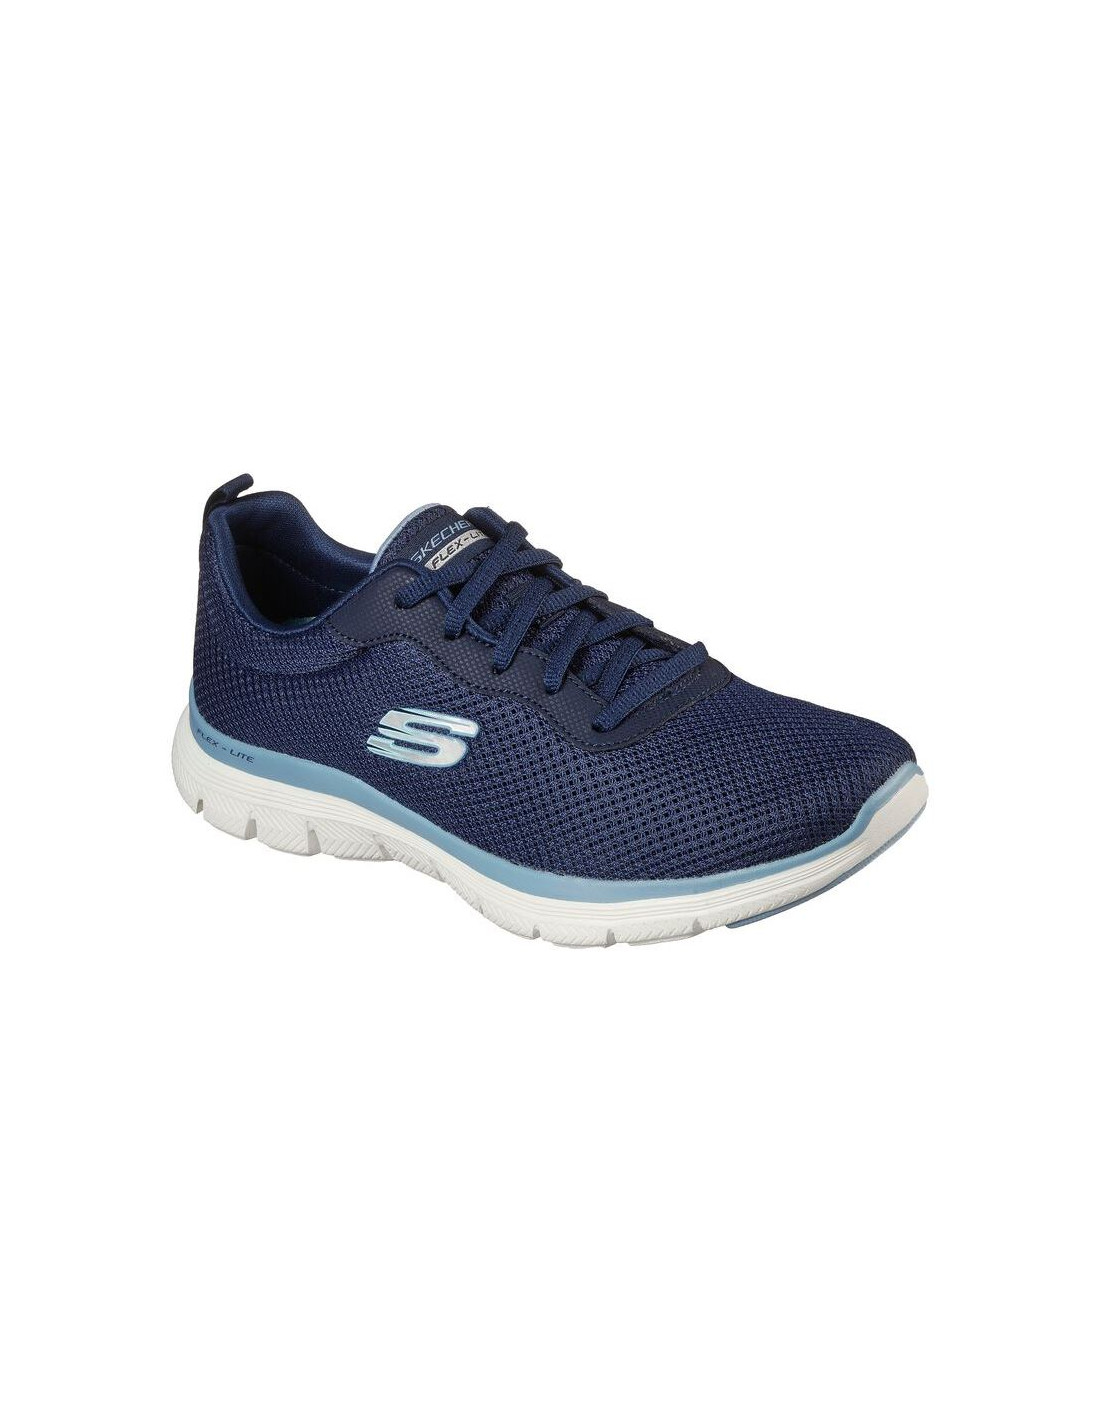 ᐈ Zapatillas Skechers Mesh Lace-Up Air-Cooled Mujer Navy – Atmosfera Sport©